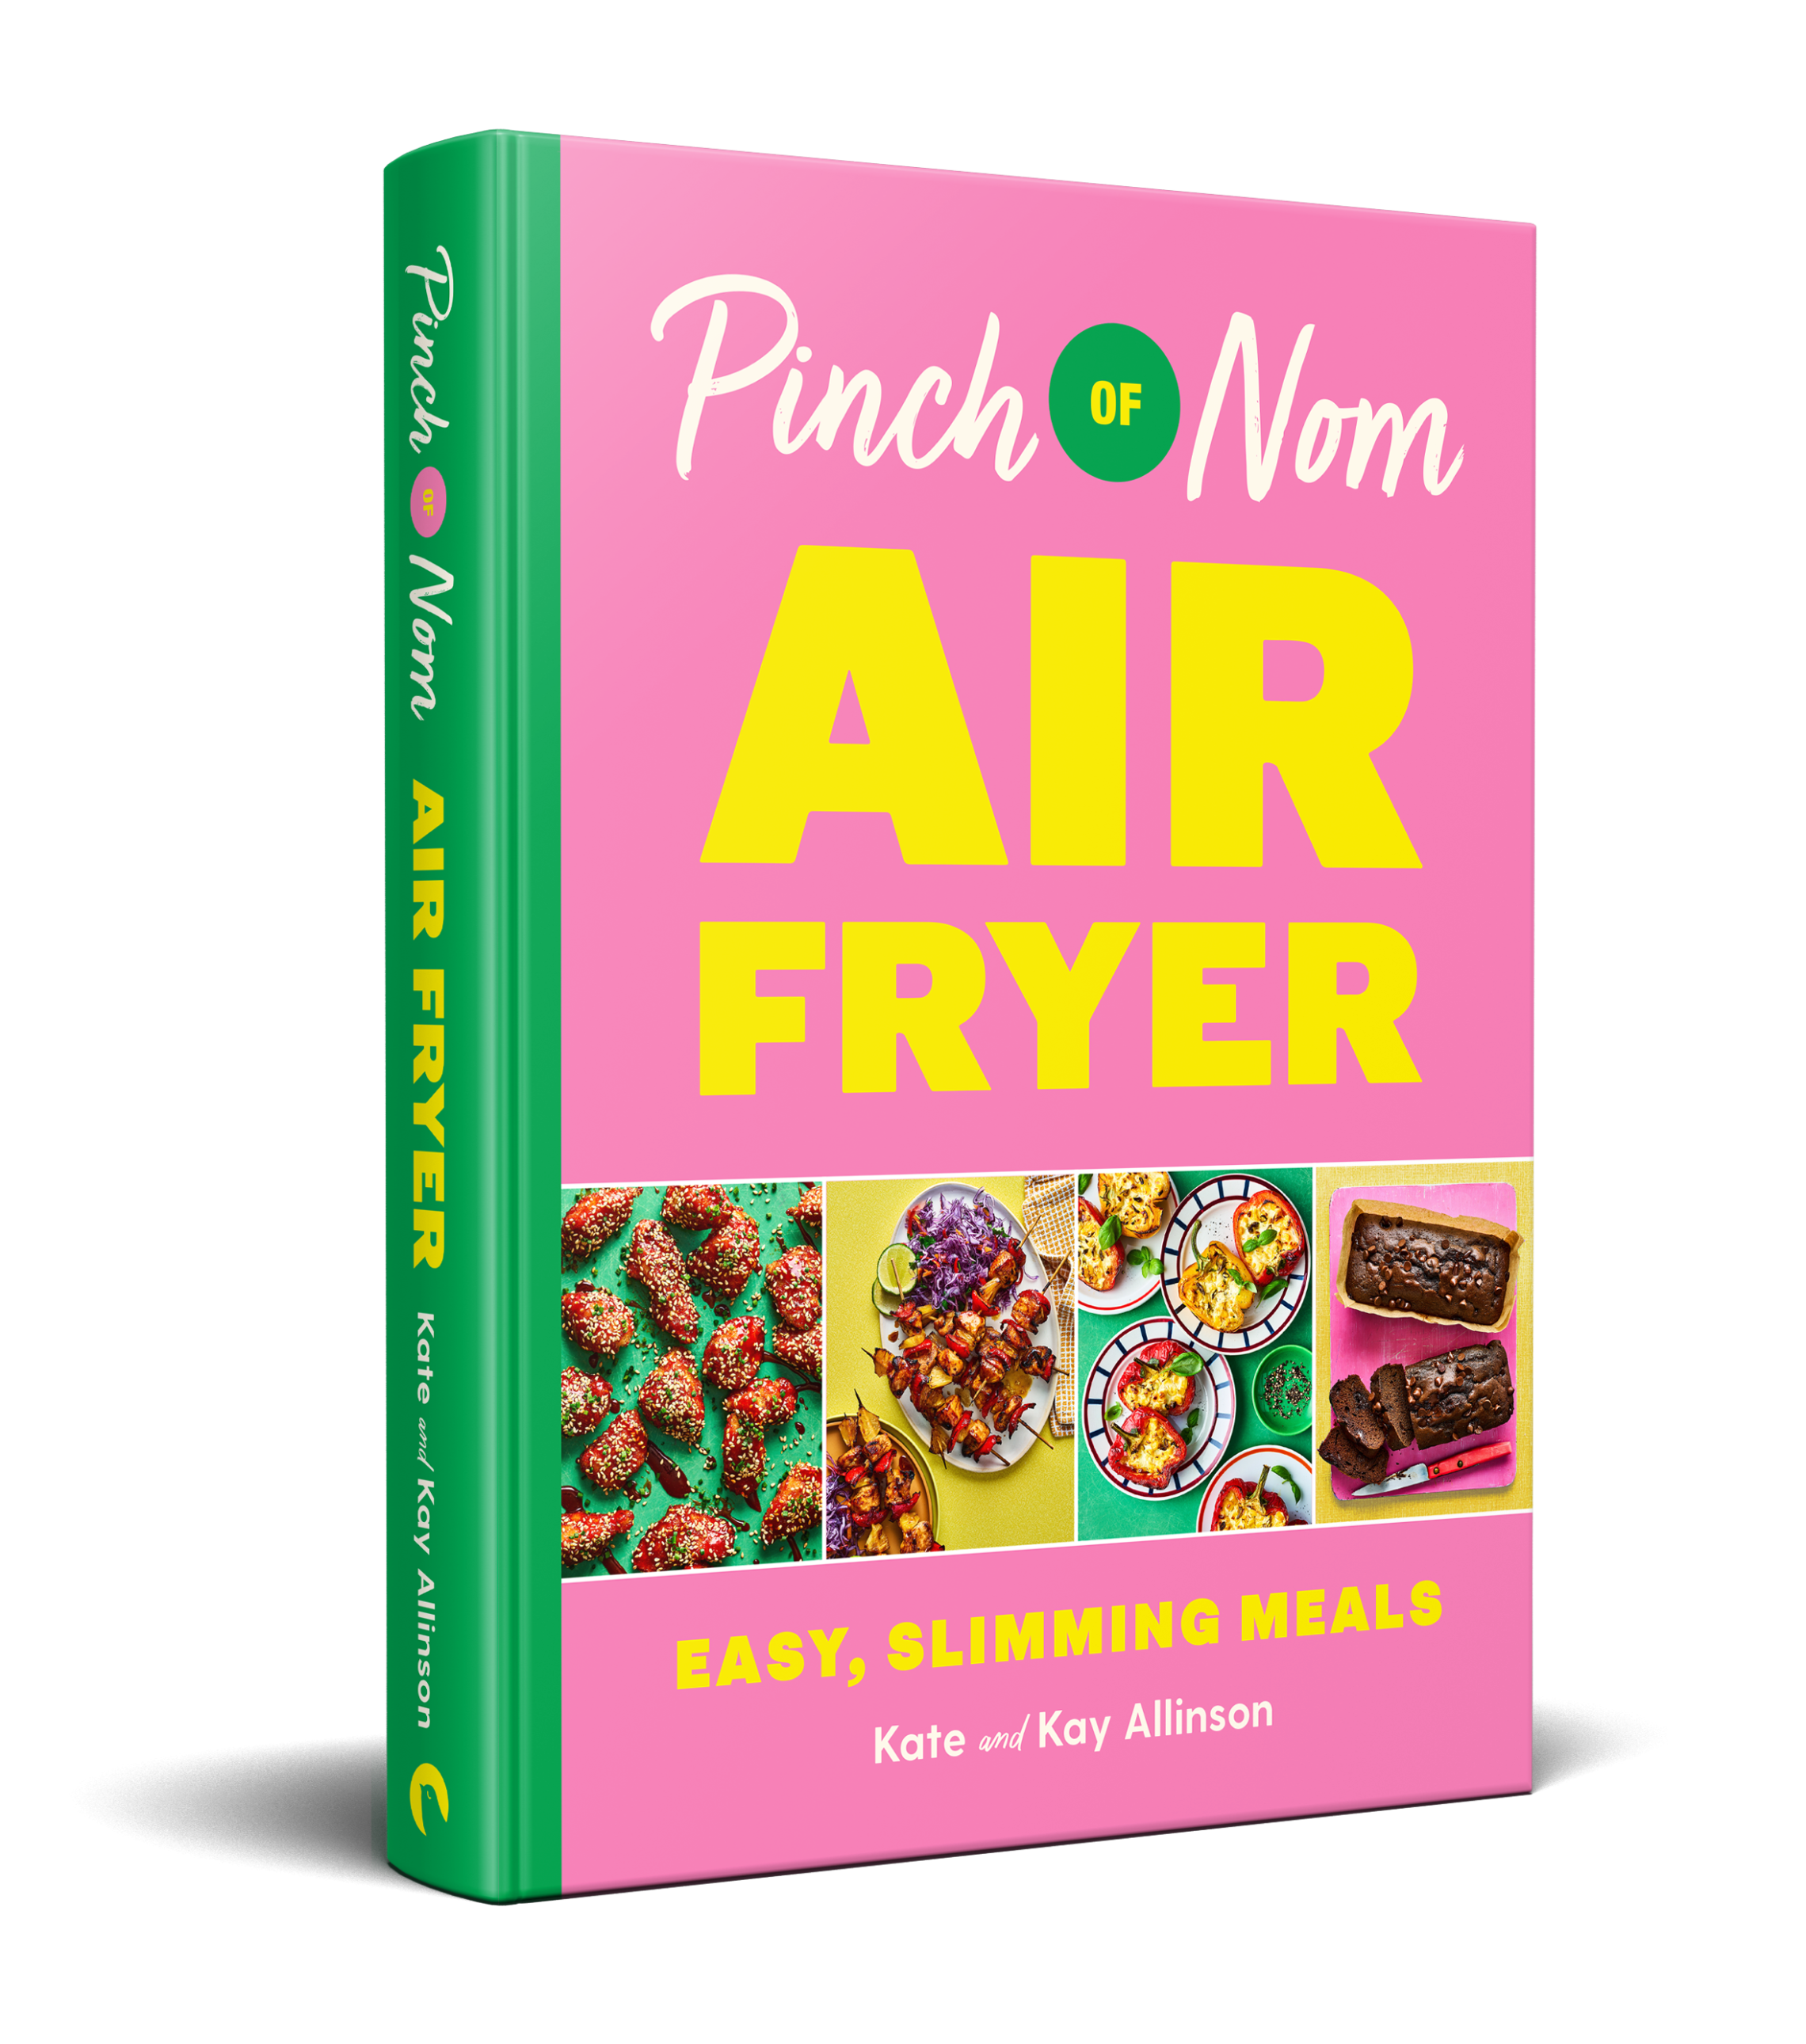 Buy our Fifth Cookbook Now! pinchofnom.com